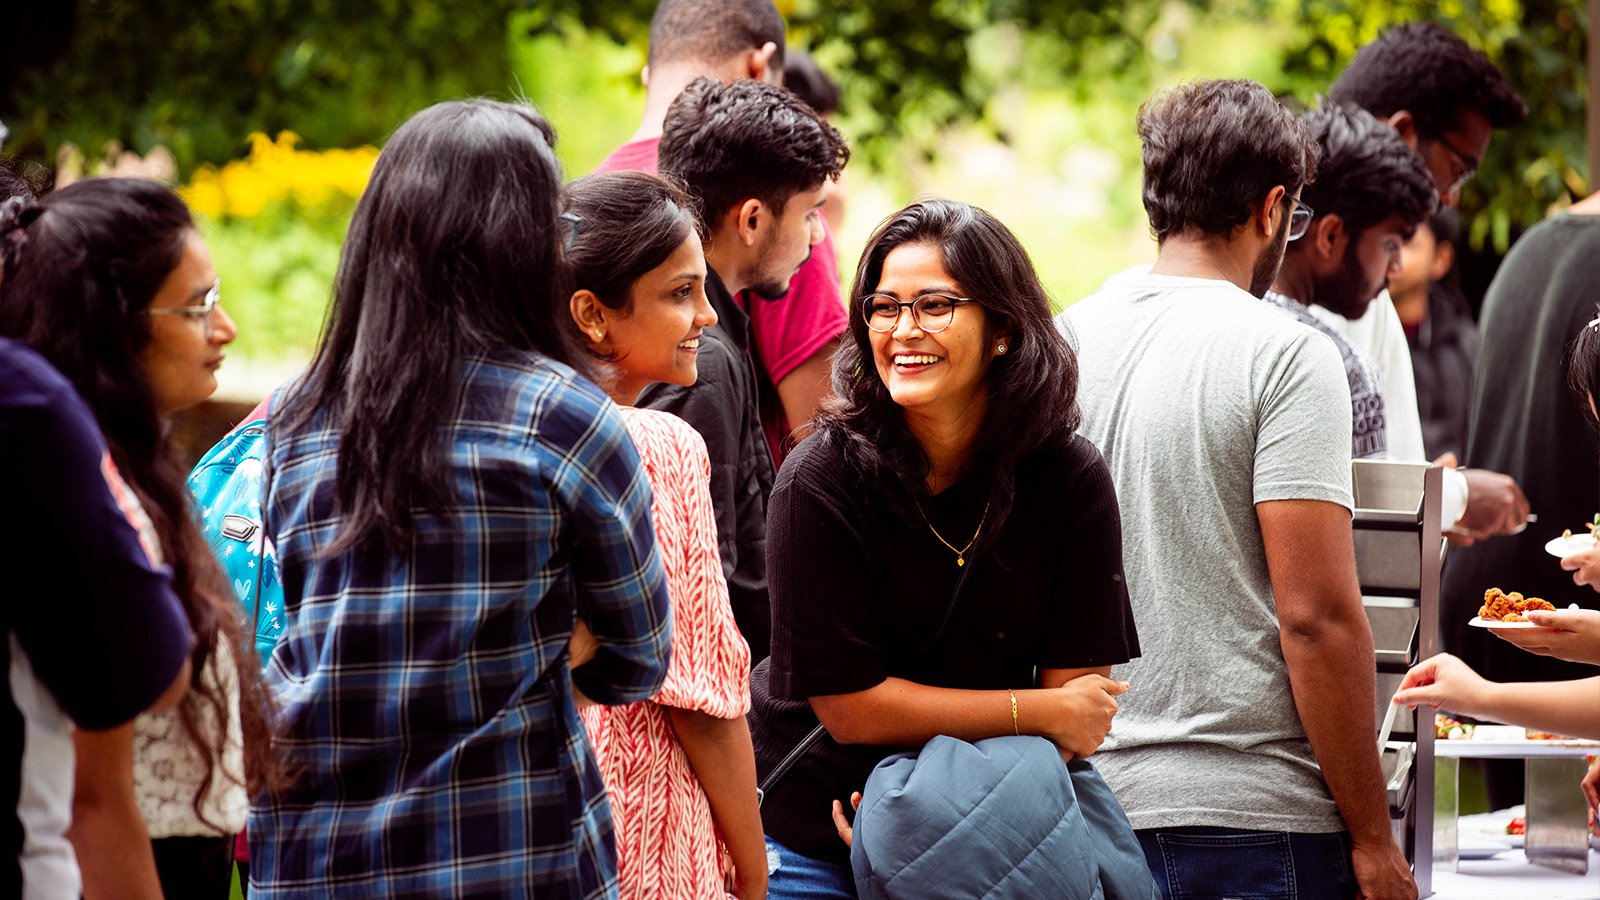 A student smiles and talks with other students while waiting in line for food at an outdoor event.